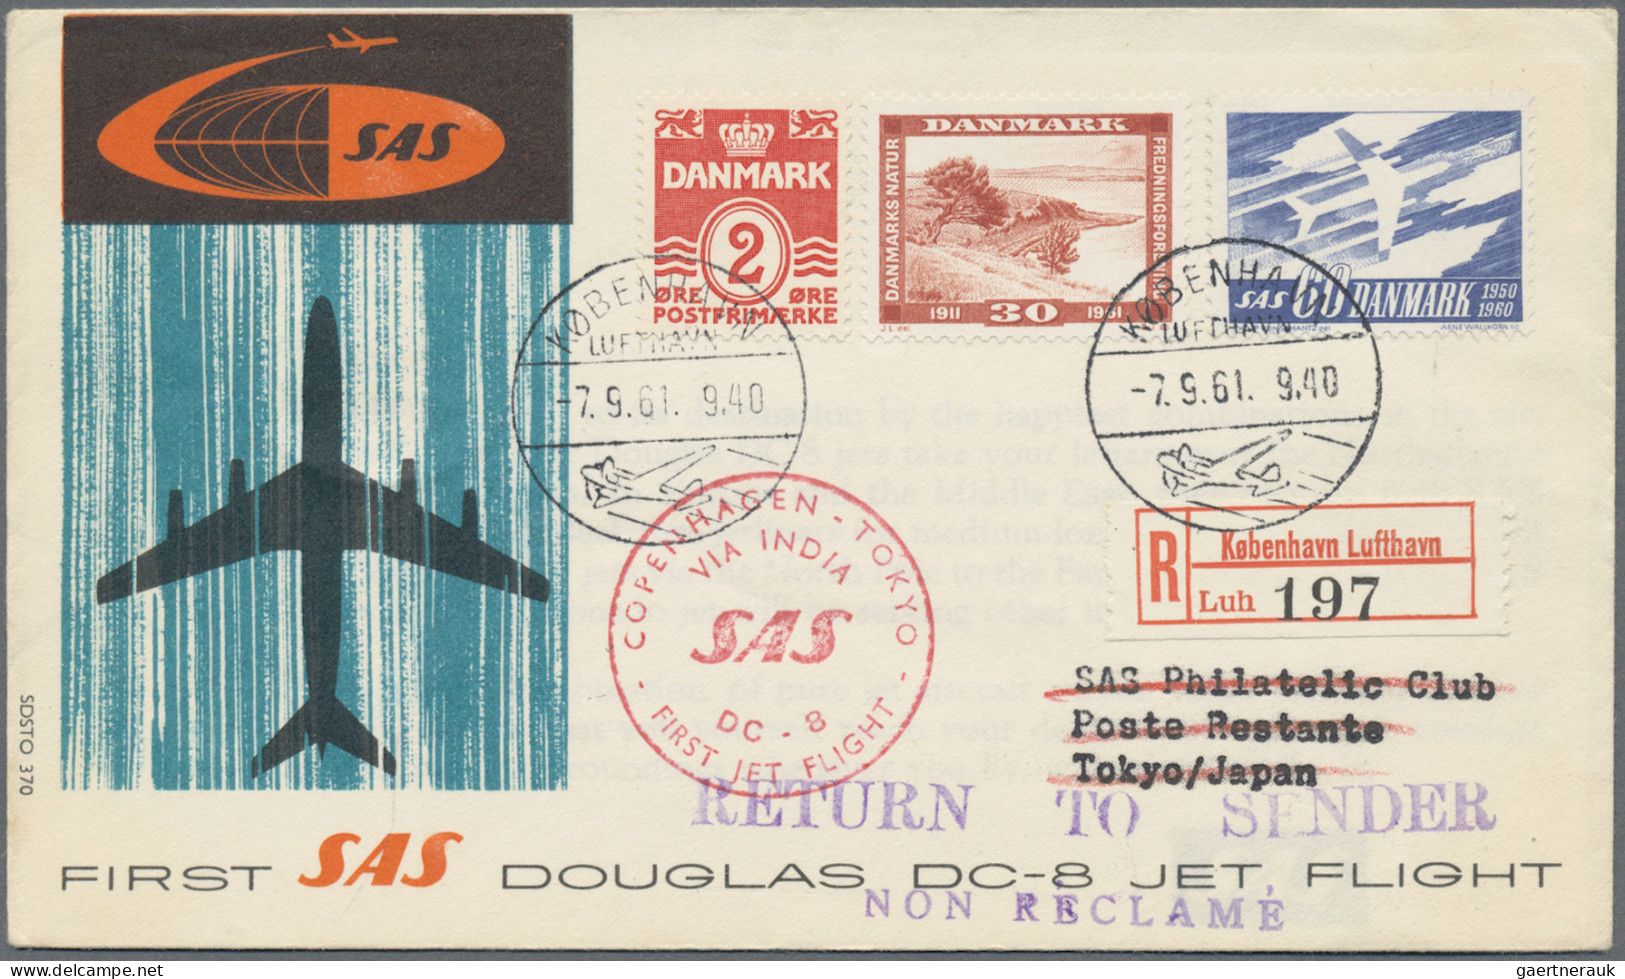 Denmark: 1936/1978, assortment of apprx. 140 airmail covers/cards, showing espec